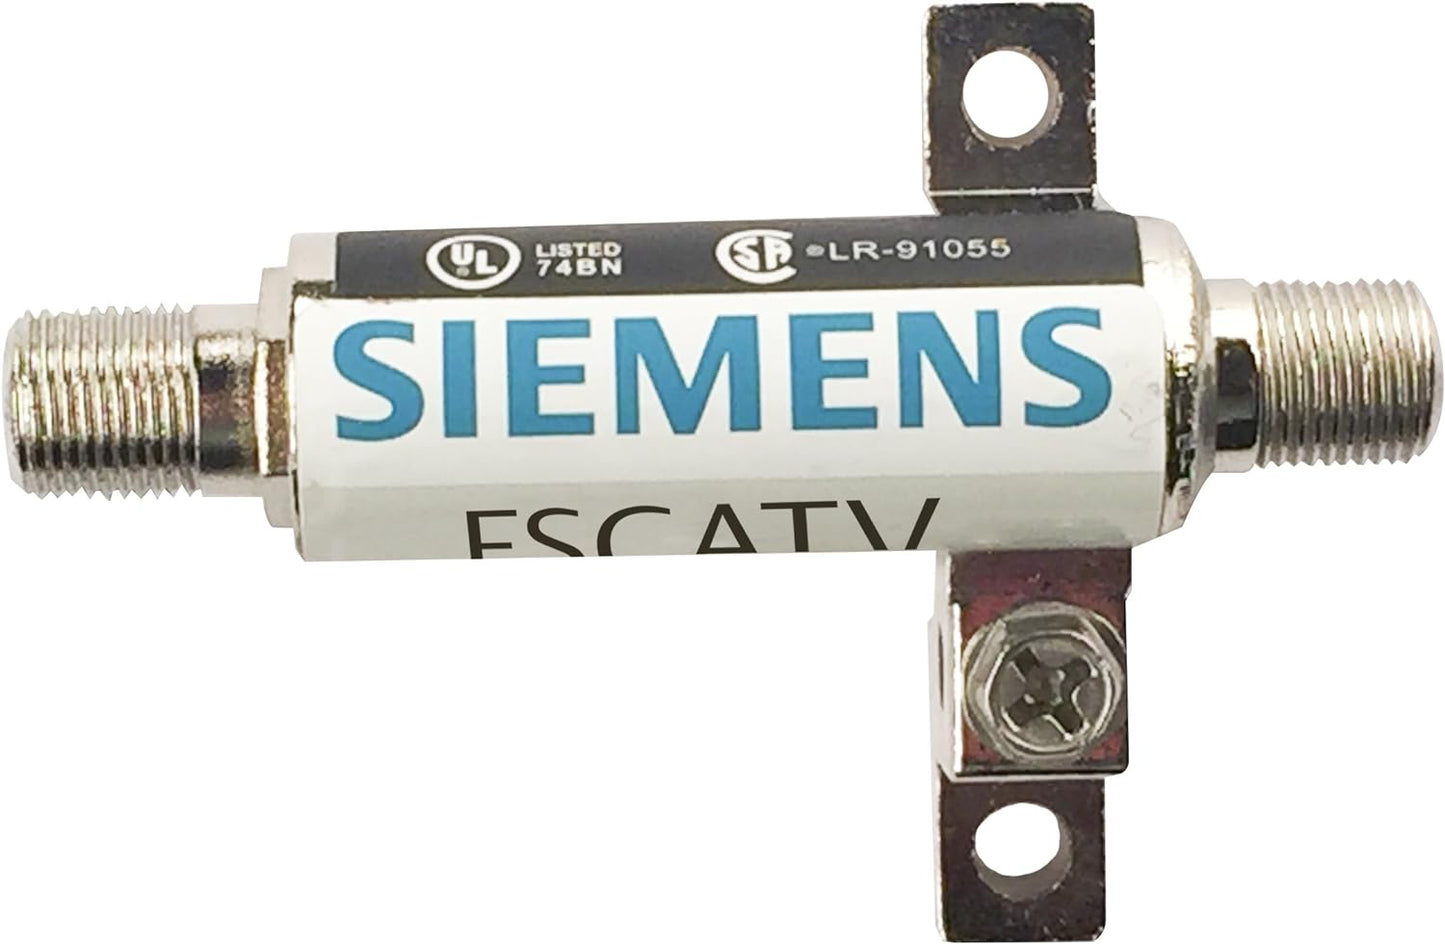 Siemens FSCATV shields coaxial connected electronics in residential and light commercial applications against electrical transient damage, including lightning, from entering through the main cable connection.